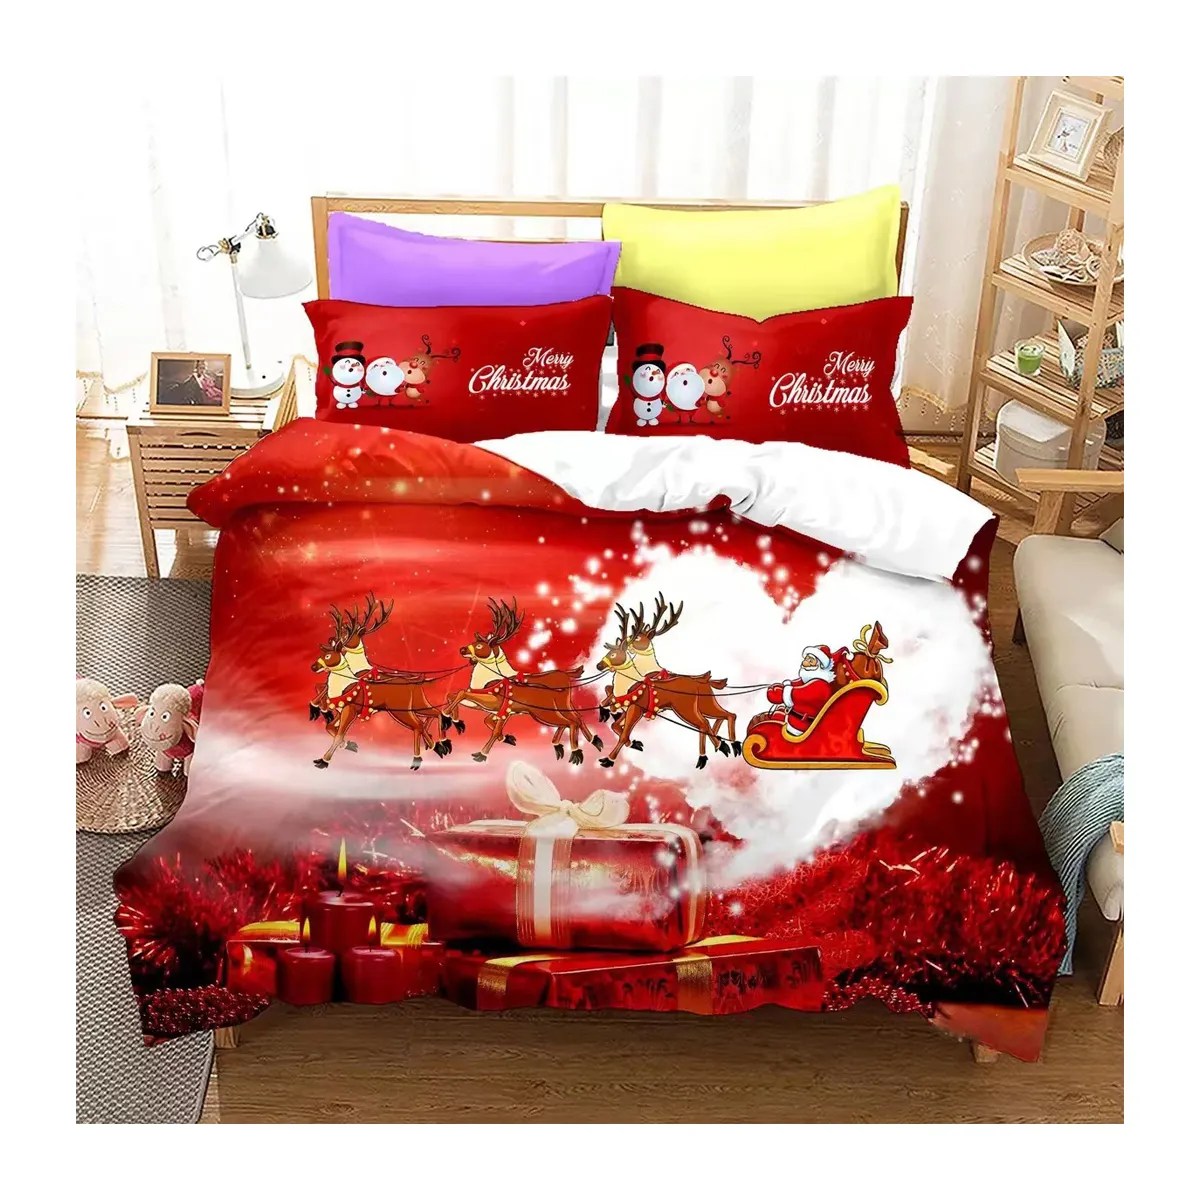 Luxury Holiday Decoration 1 Duvet Cover+2 Pillowcases Queen Size Snowflake Decor Red Bedding Set Christmas Duvet Cover Set